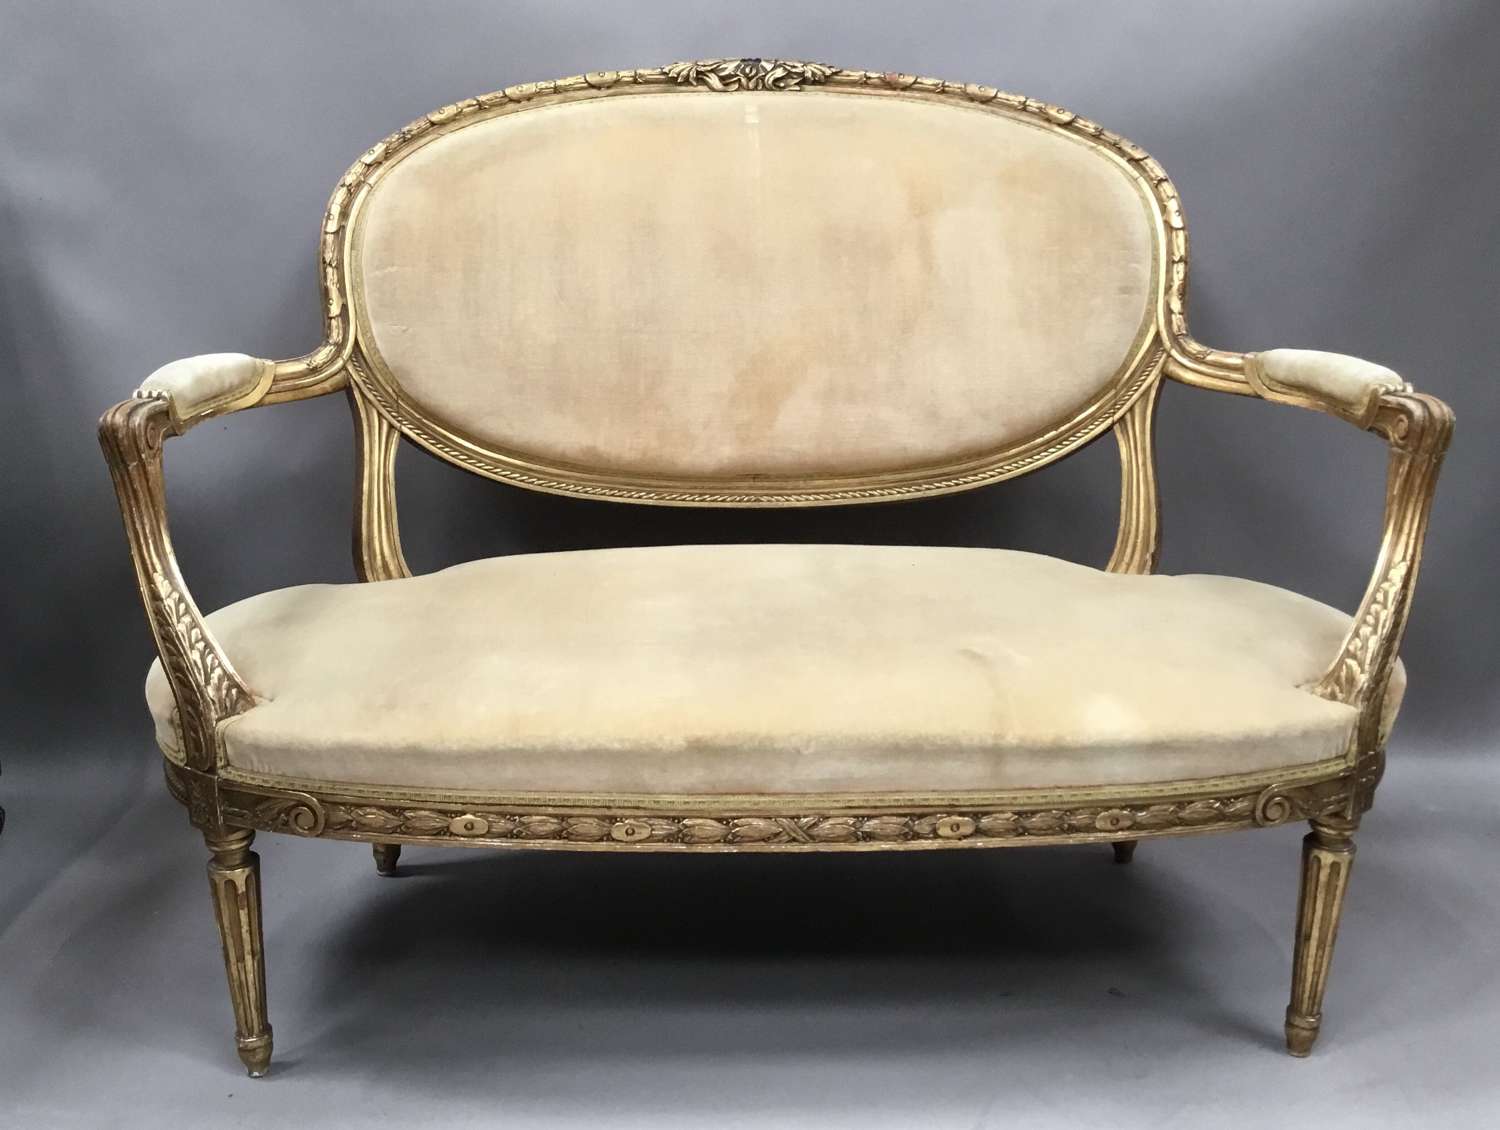 C19th carved giltwood Louis XVI style settee